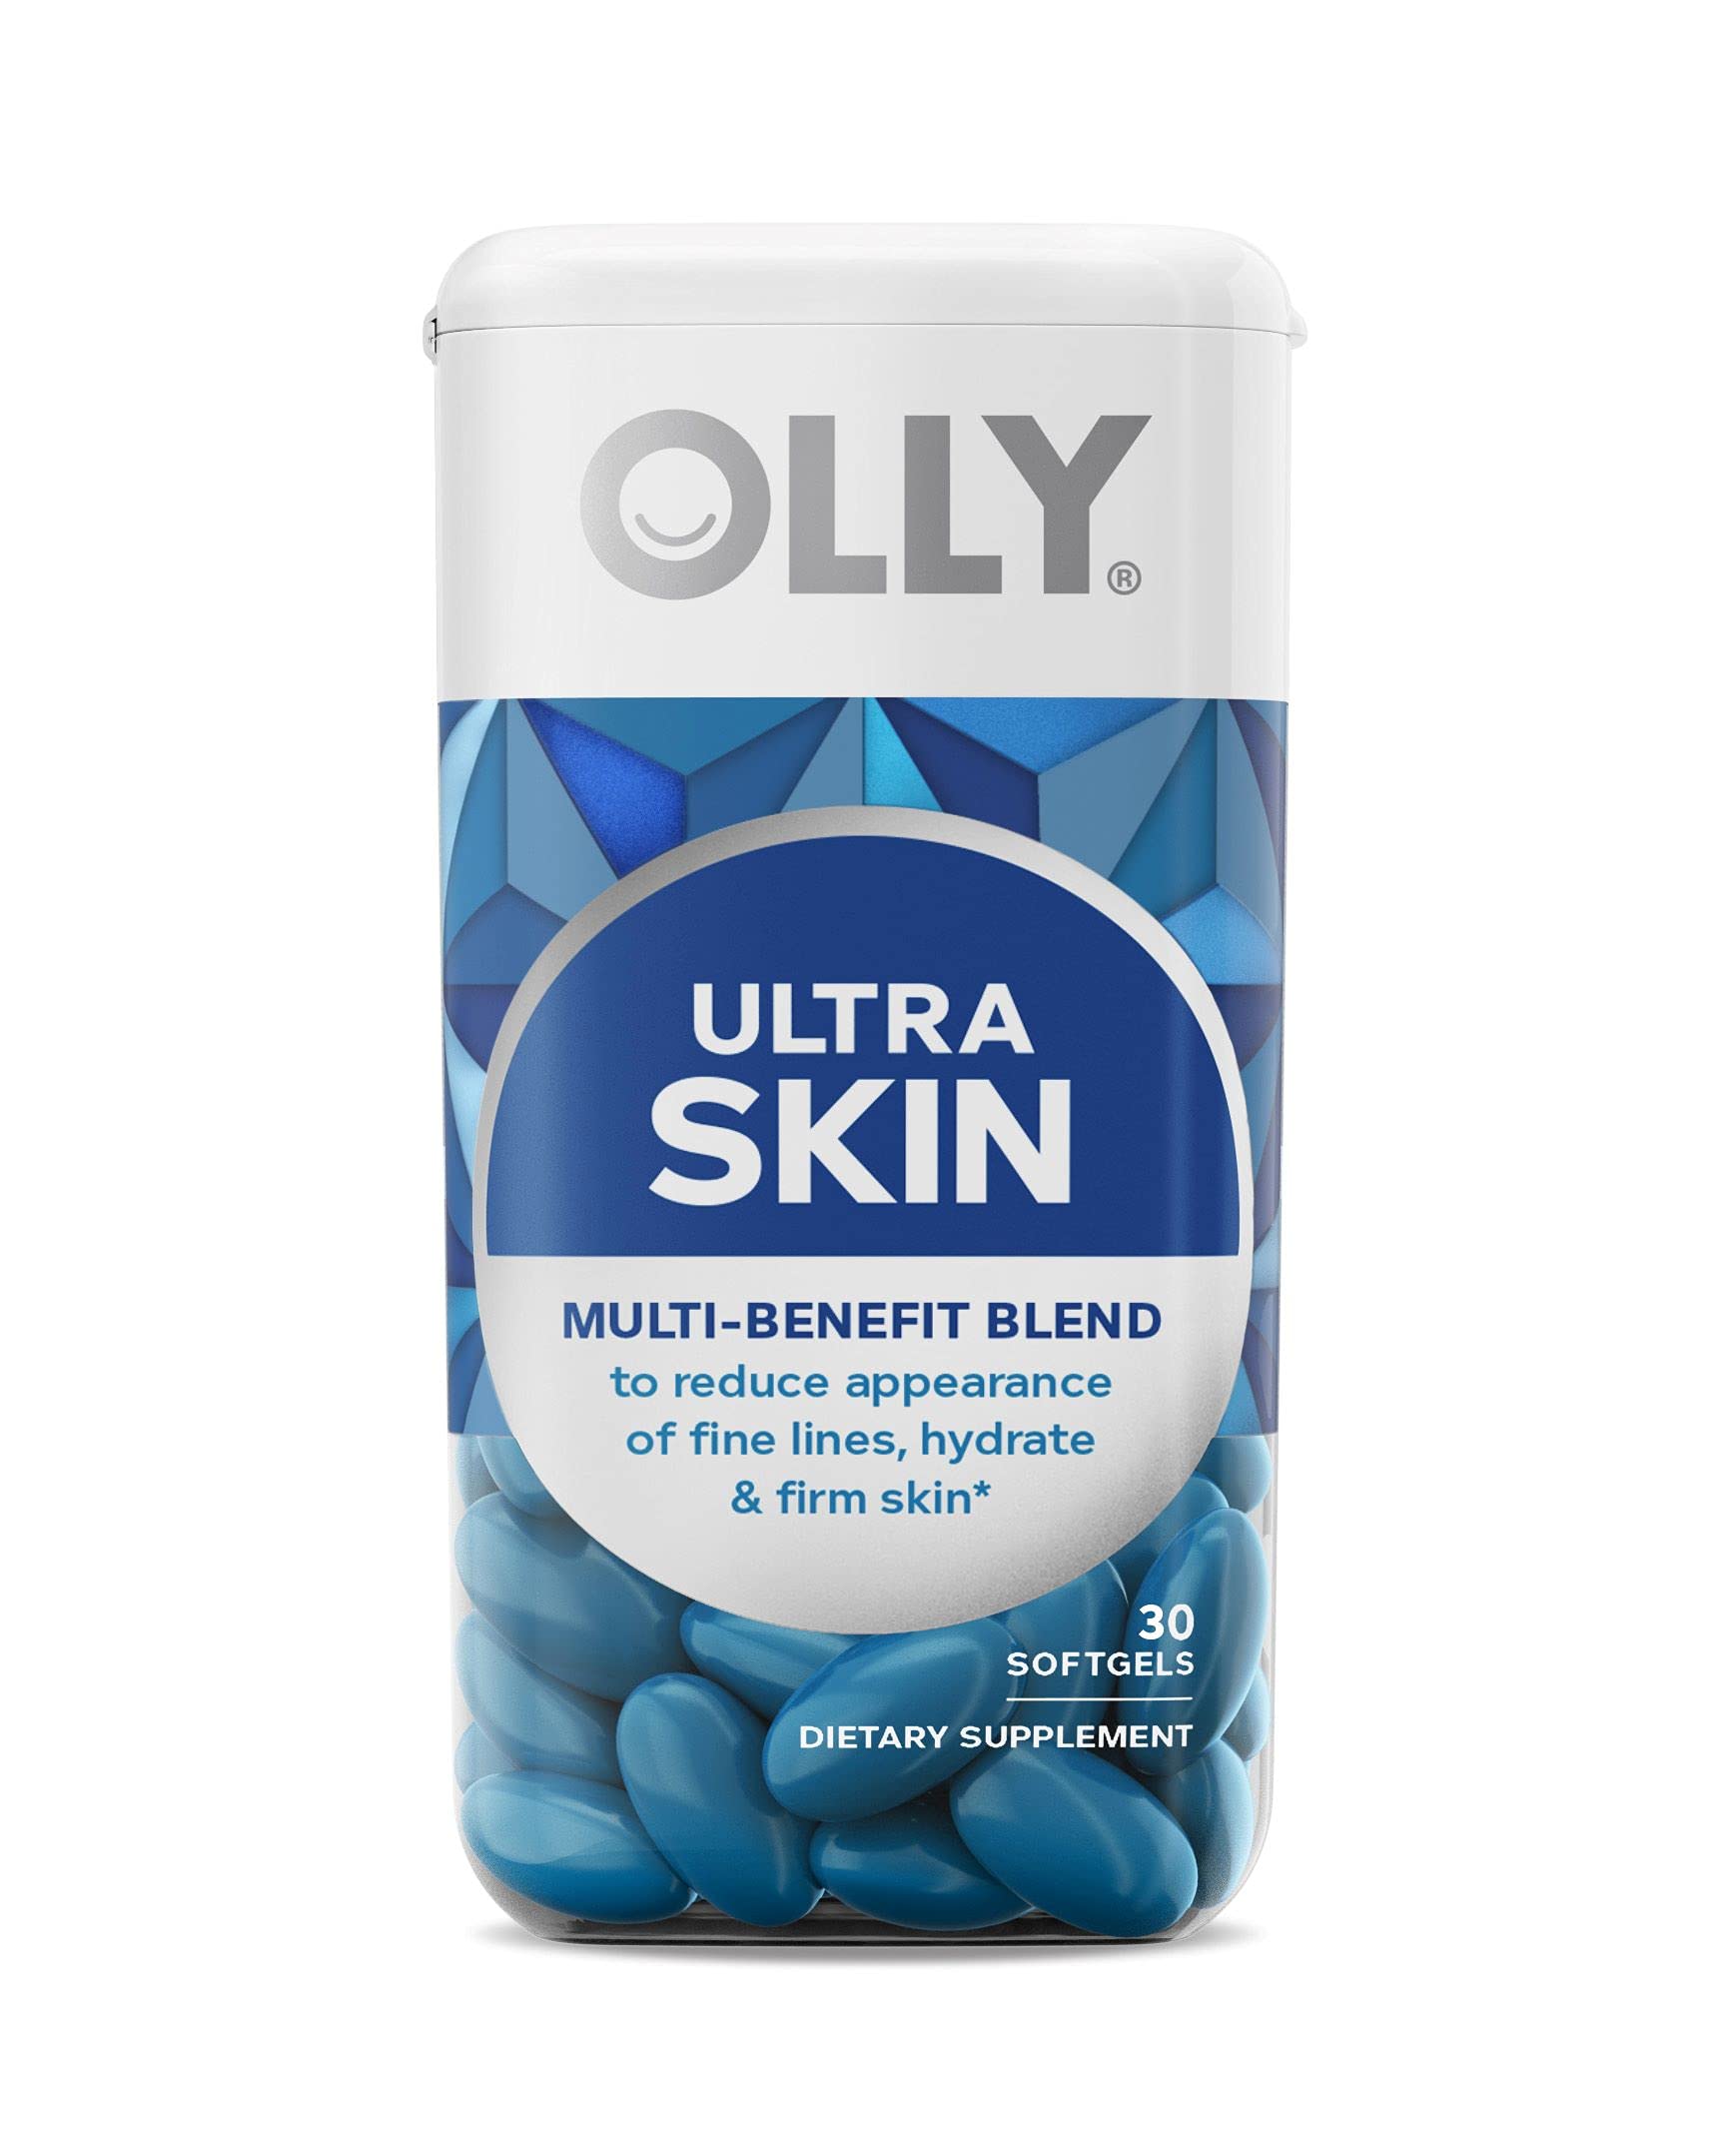 OLLY Ultra Strength Skin Softgels, Hydrate and Firm Skin, Hyaluronic Acid, Zeaxanthin, Lutein, Vitamin C, Skin Supplement, 30 Day Supply - 30 Count (Packaging May Vary)